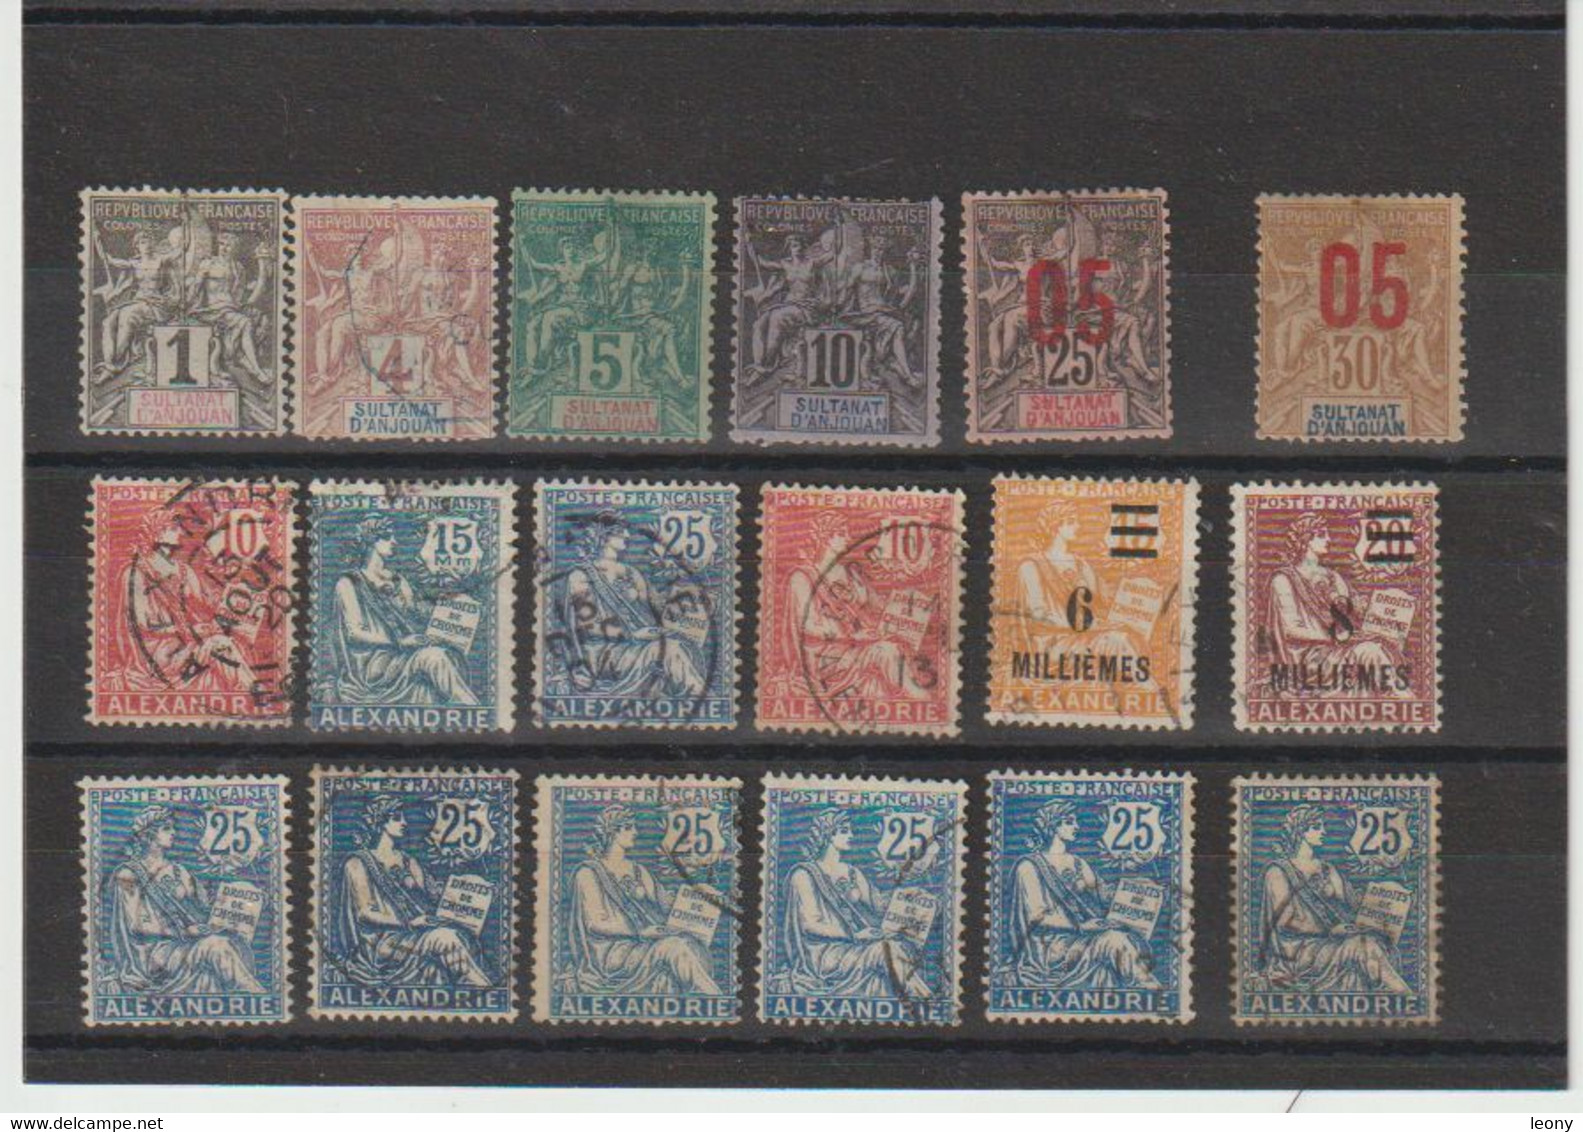 TIMBRES  DIVERS De  "  ANJOUAN - ALEXANDRIE "  - TYPE SAGE - TYPE MOUCHON - OBLITERES - Used Stamps